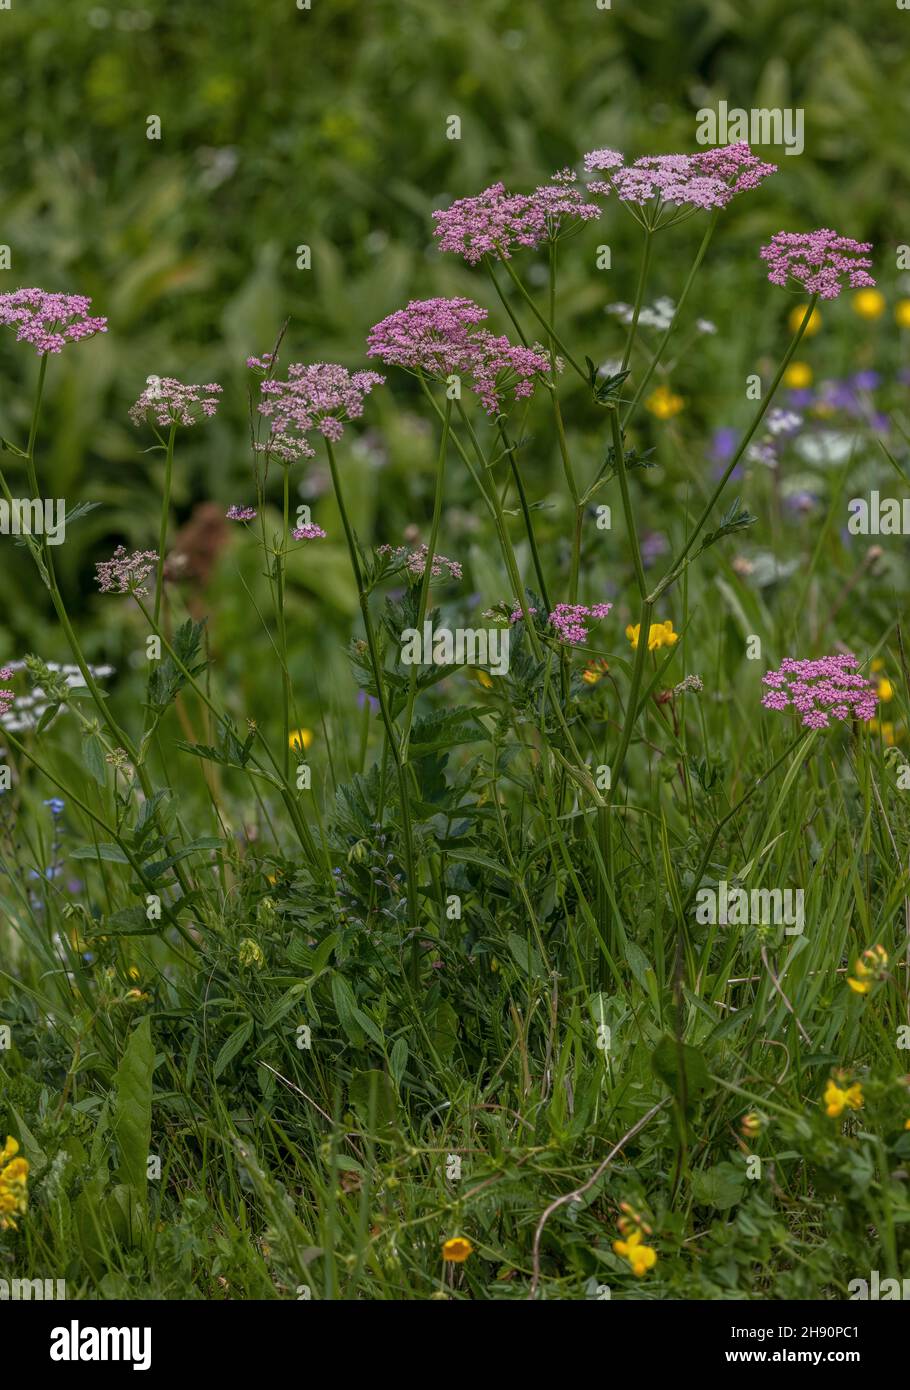 Greater Burnet Saxifrage, Pimpinella major in flower in alpine pasture. Stock Photo